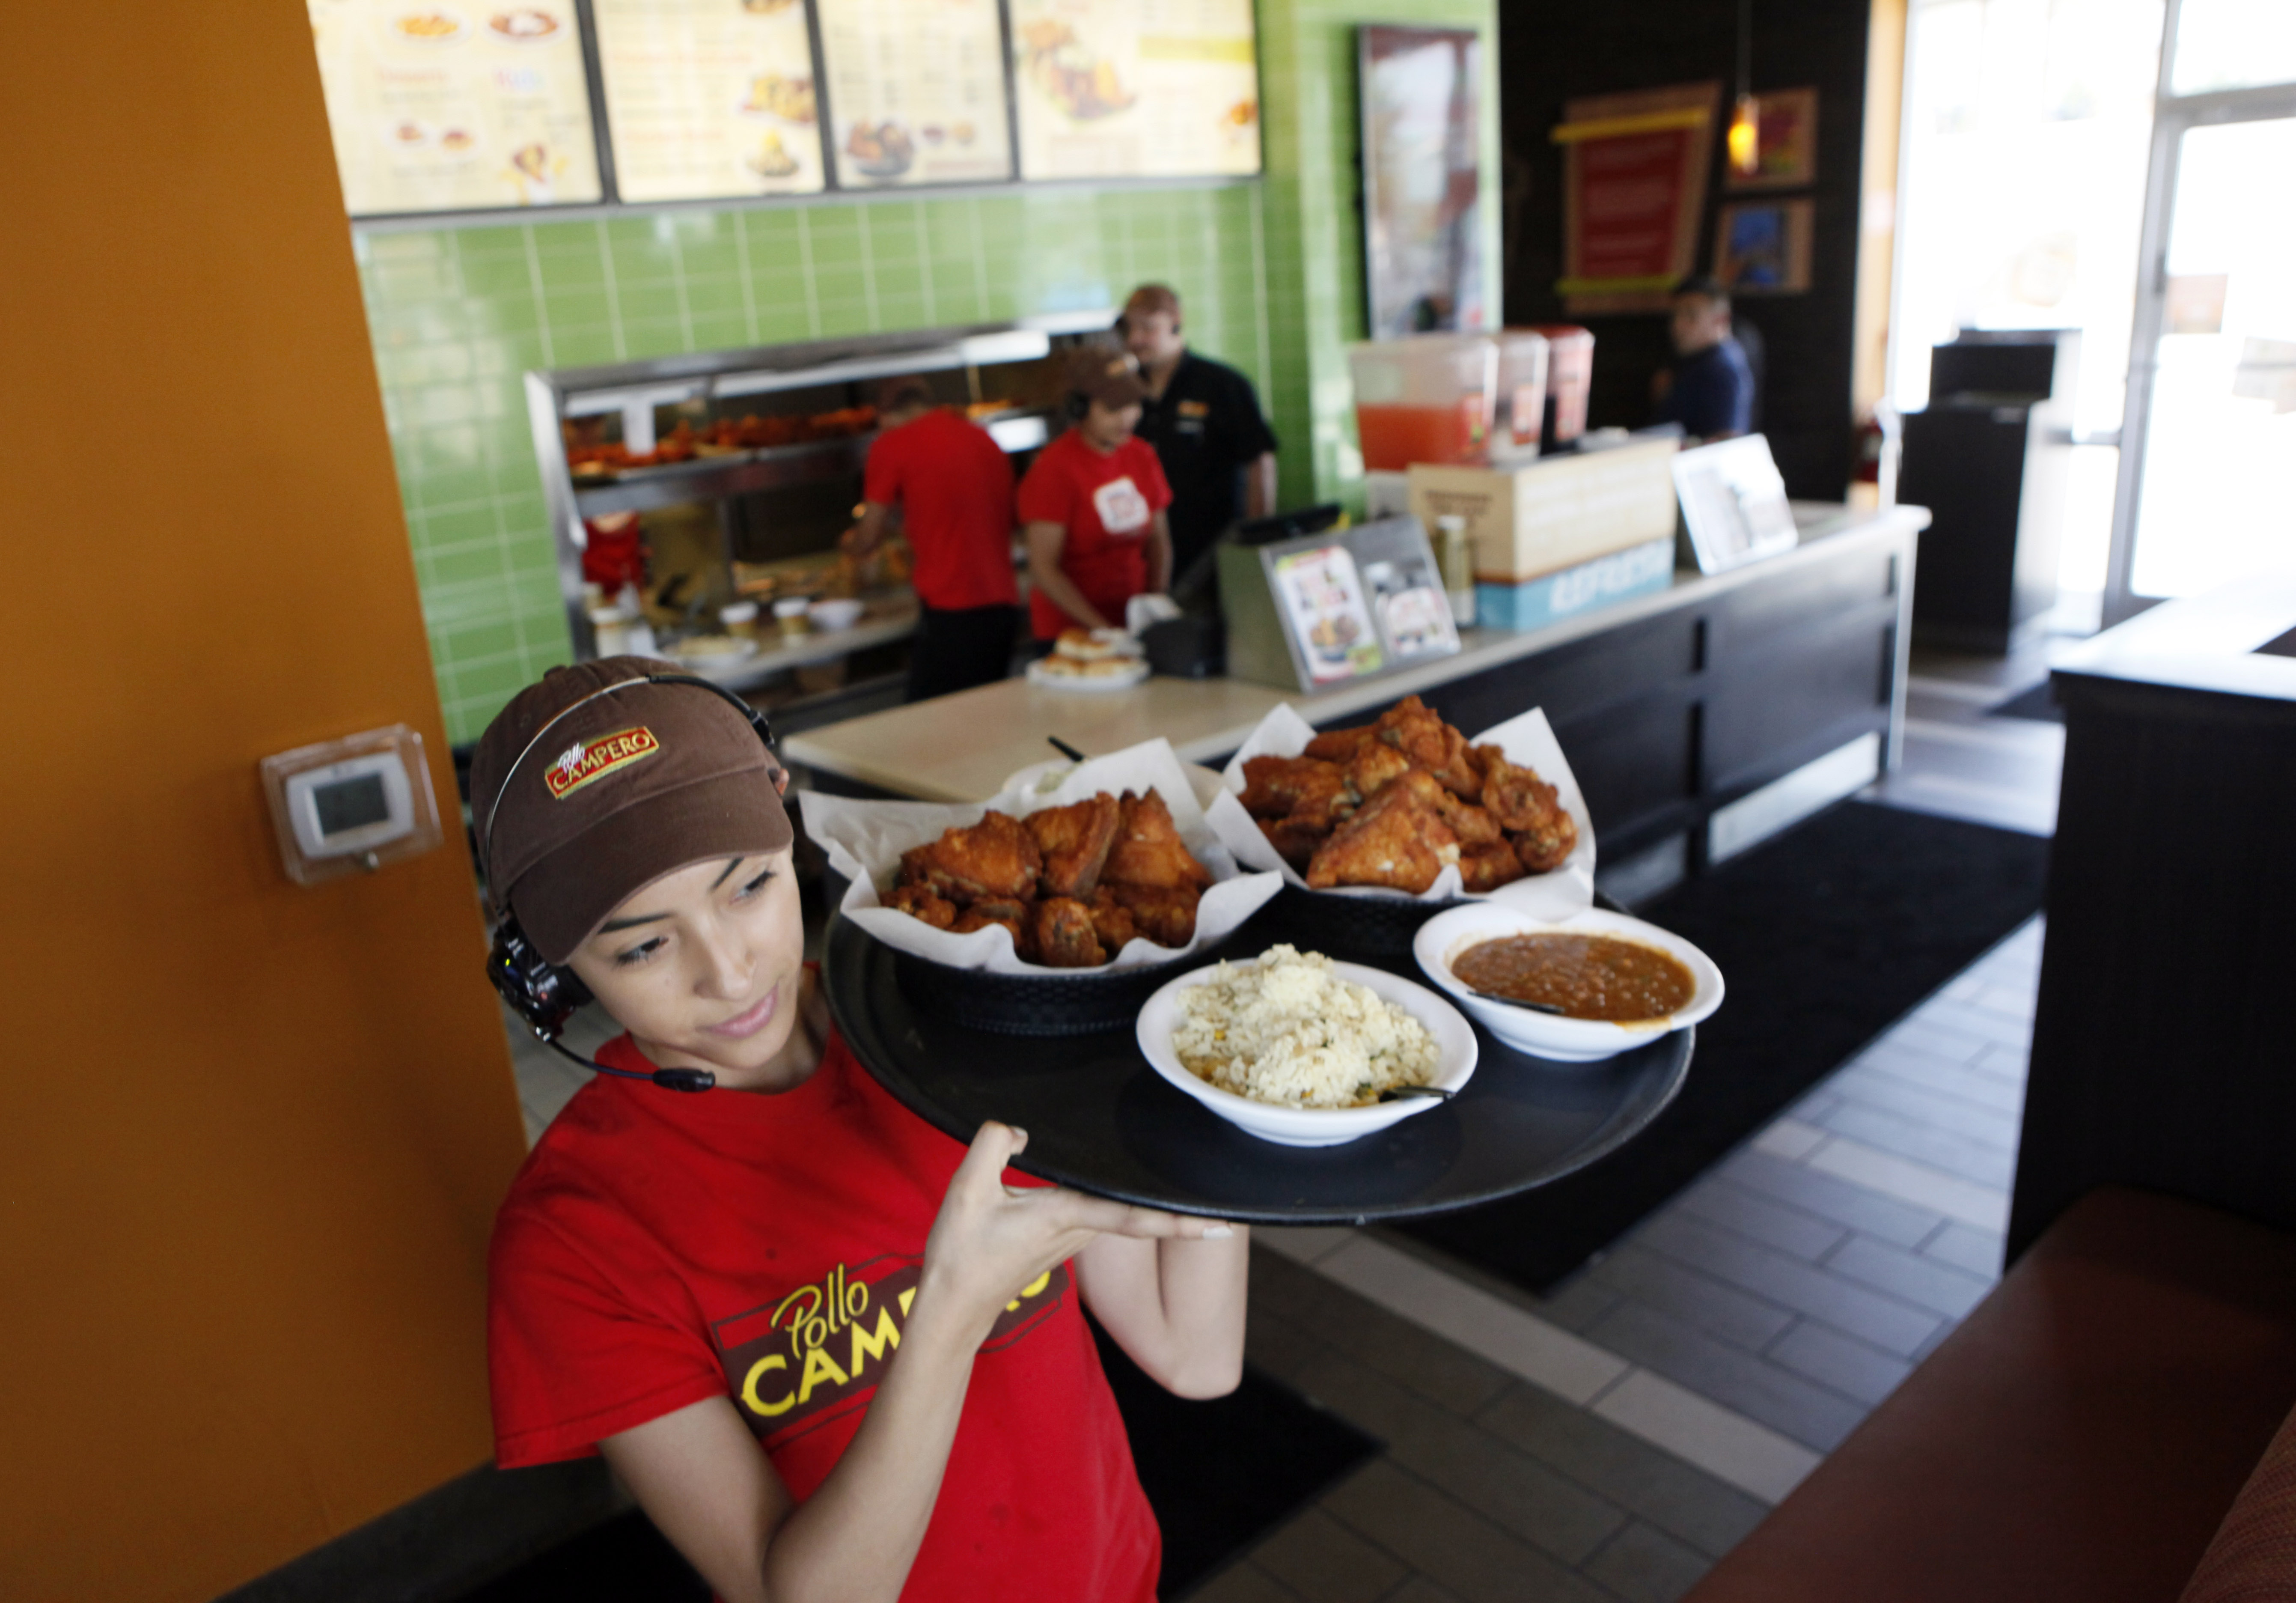 Guatemalan-born Pollo Campero opened its 100th location in the U.S. and is planning on...